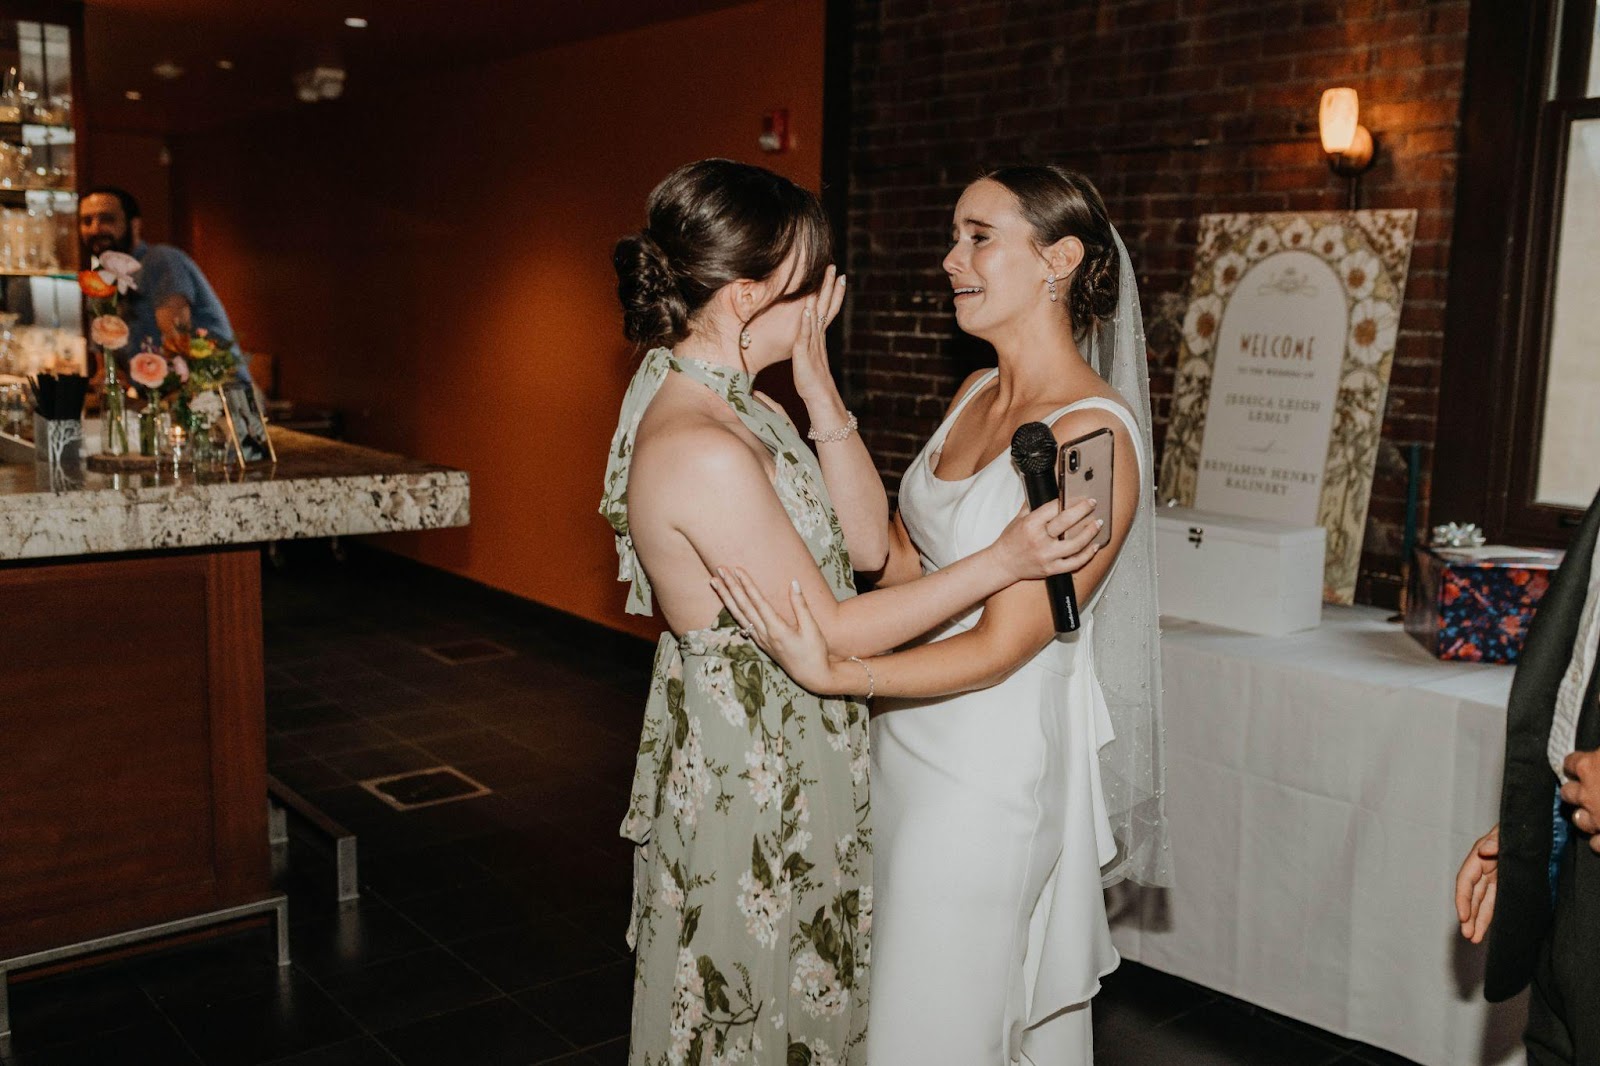 Documentary-style wedding photography captures a bride embracing her maid of honor with tears in her eyes.